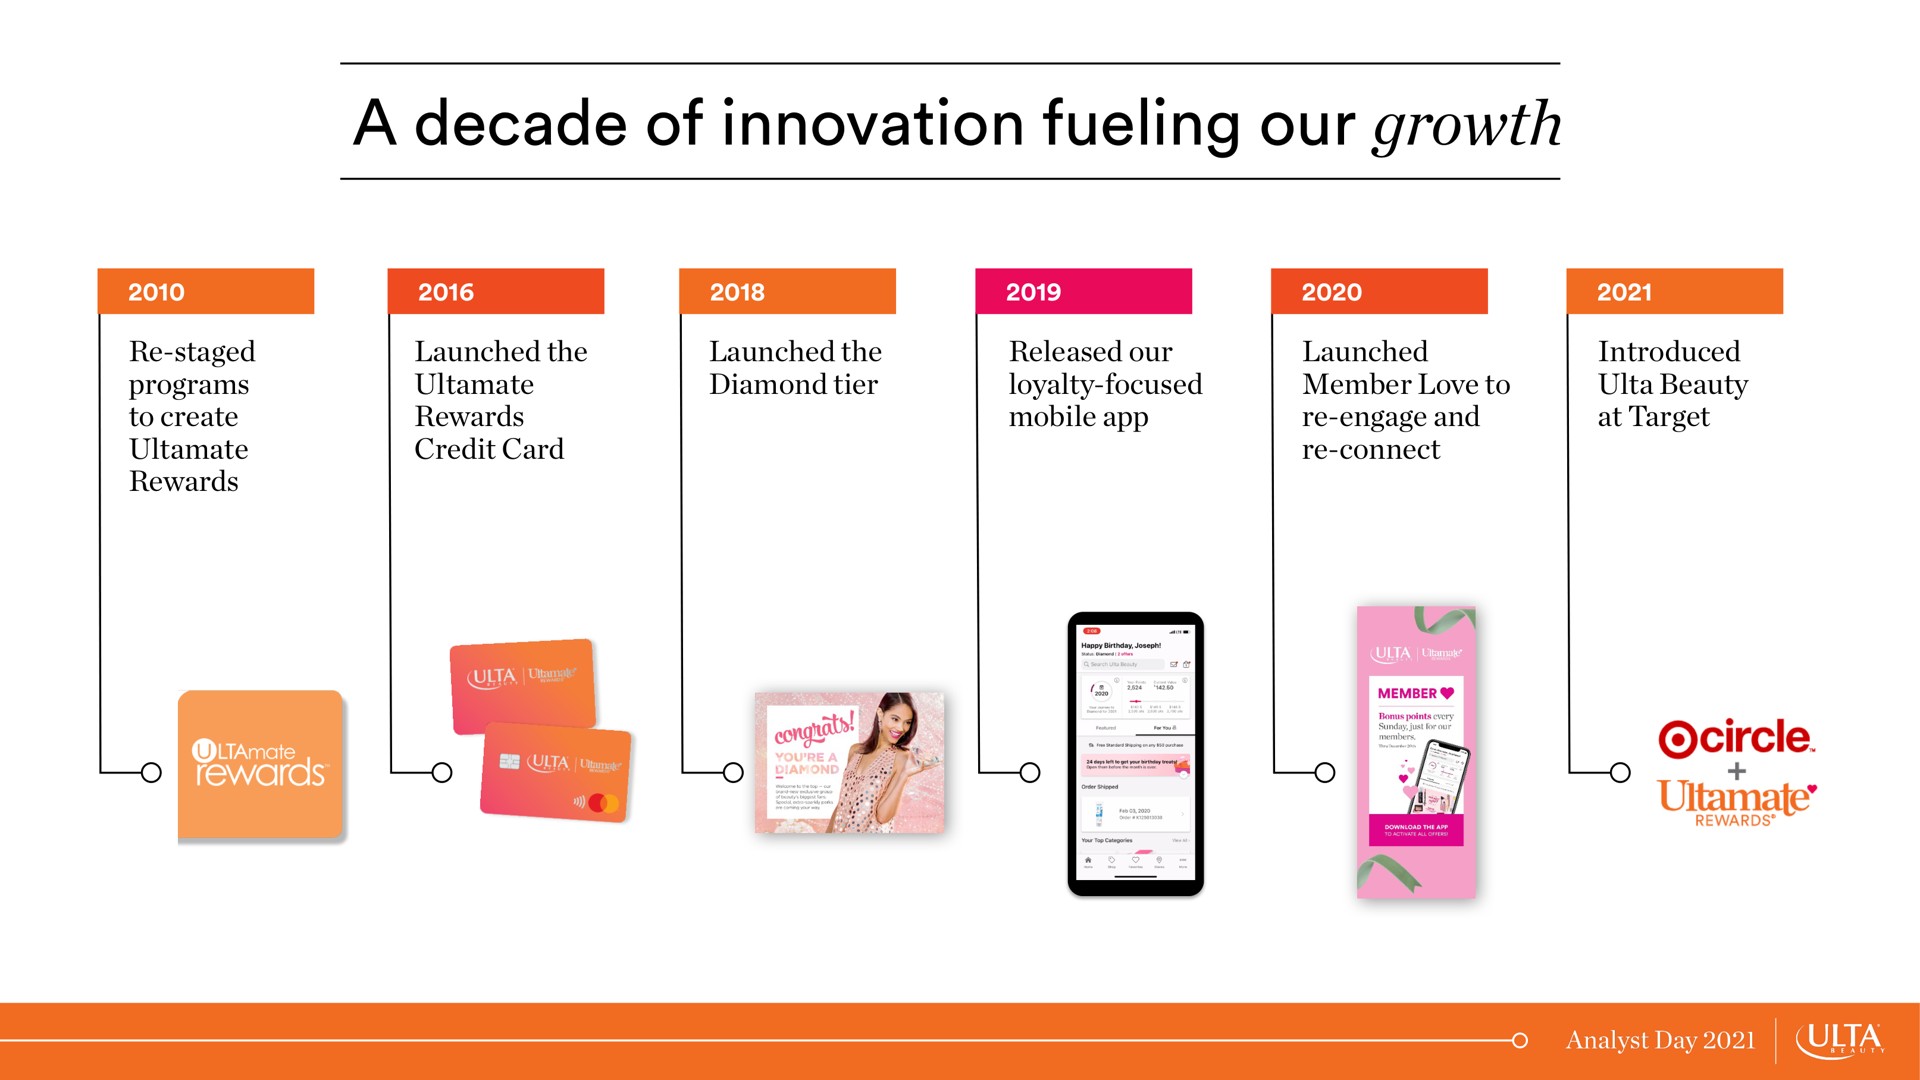 a decade of innovation fueling our growth | Ulta Beauty